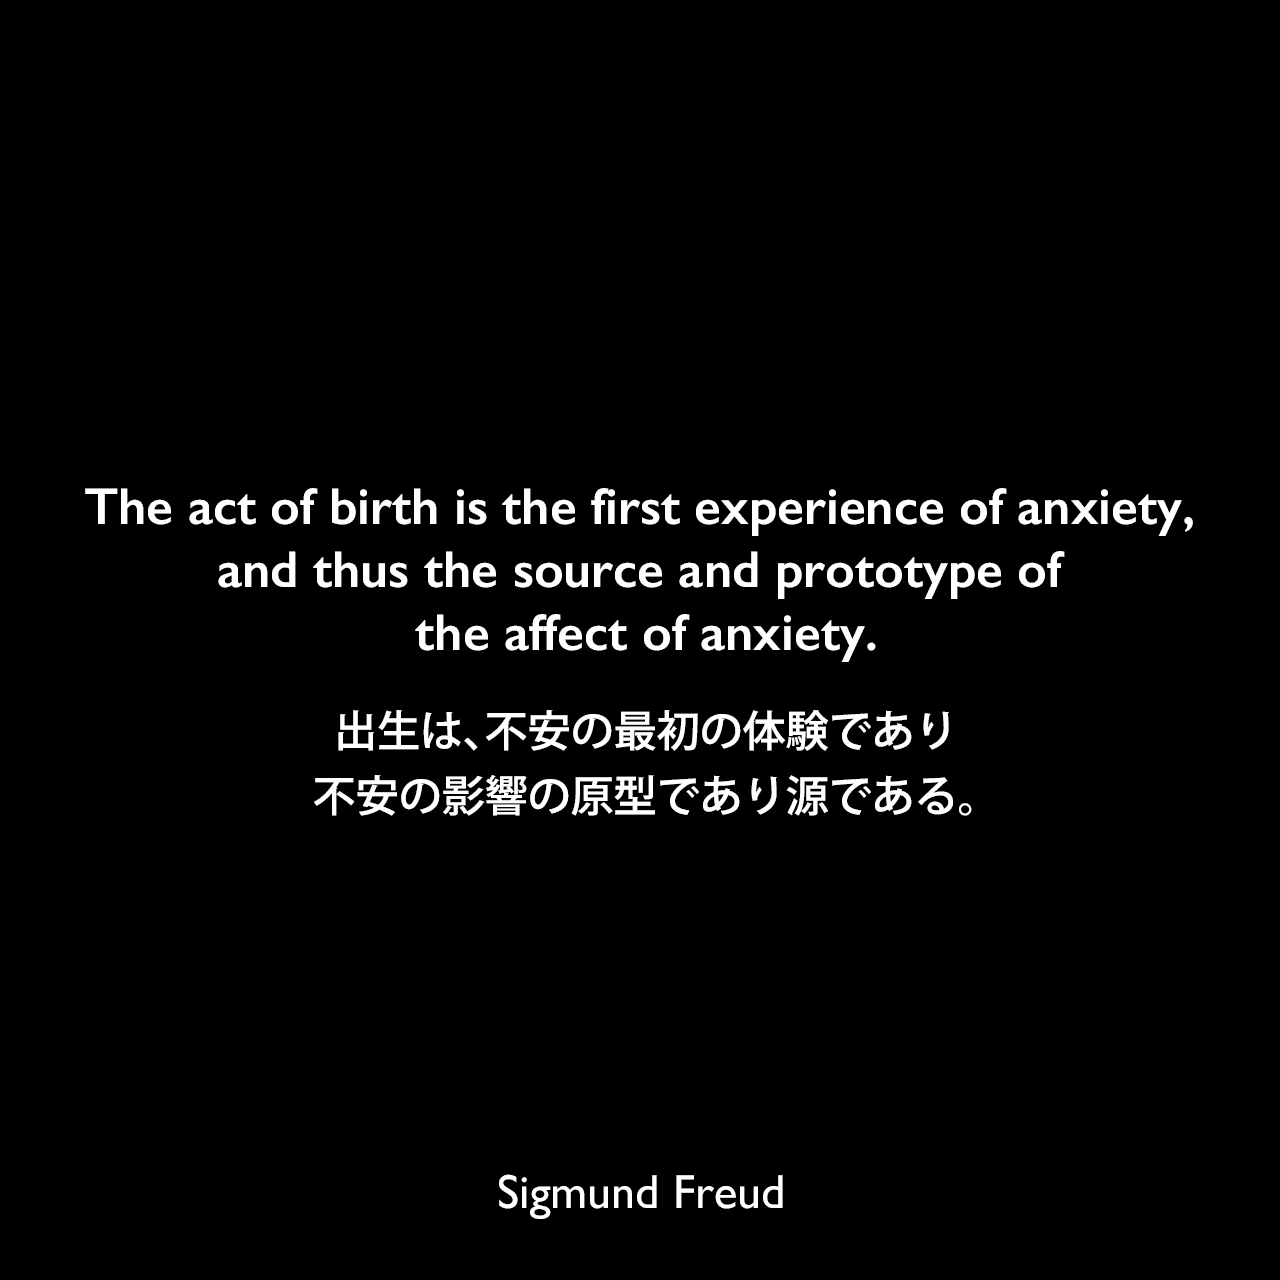 The act of birth is the first experience of anxiety, and thus the source and prototype of the affect of anxiety.出生は、不安の最初の体験であり、不安の影響の原型であり源である。- フロイトによる本「夢判断」よりSigmund Freud